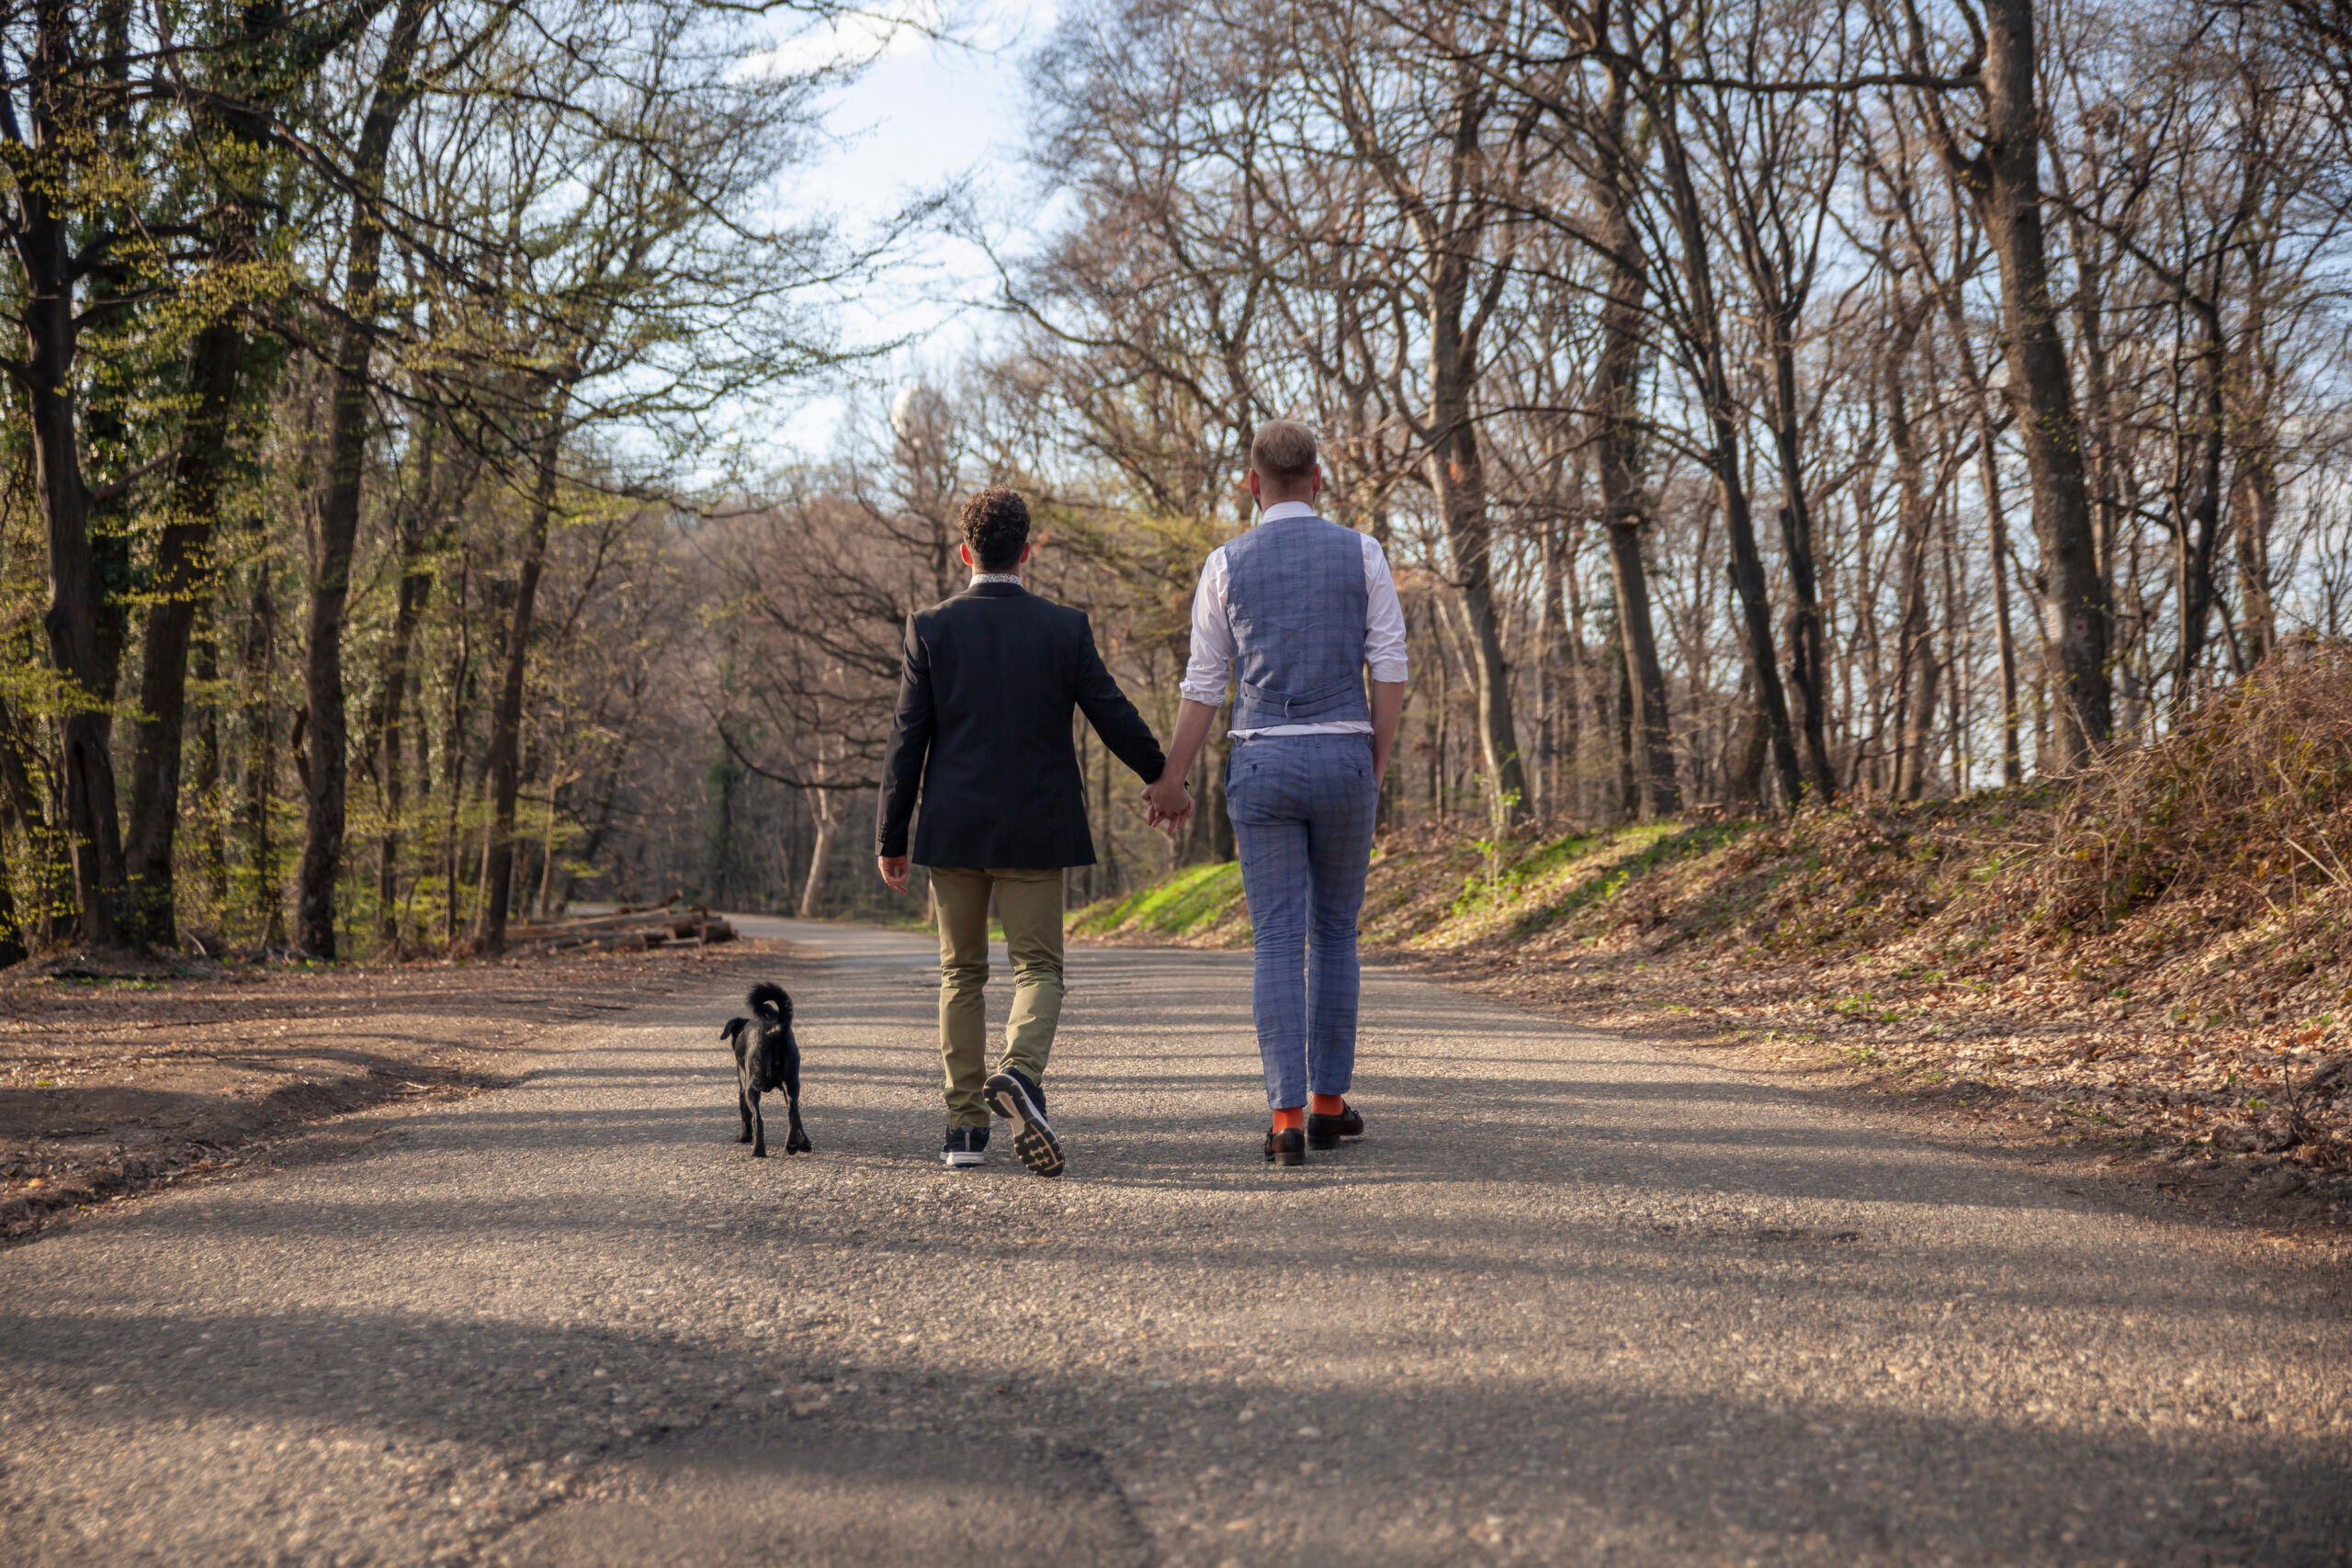 rear view, two gay man walking in forest, on asphalt road. Together holding hands. Their puppy dog walking with them too close by.